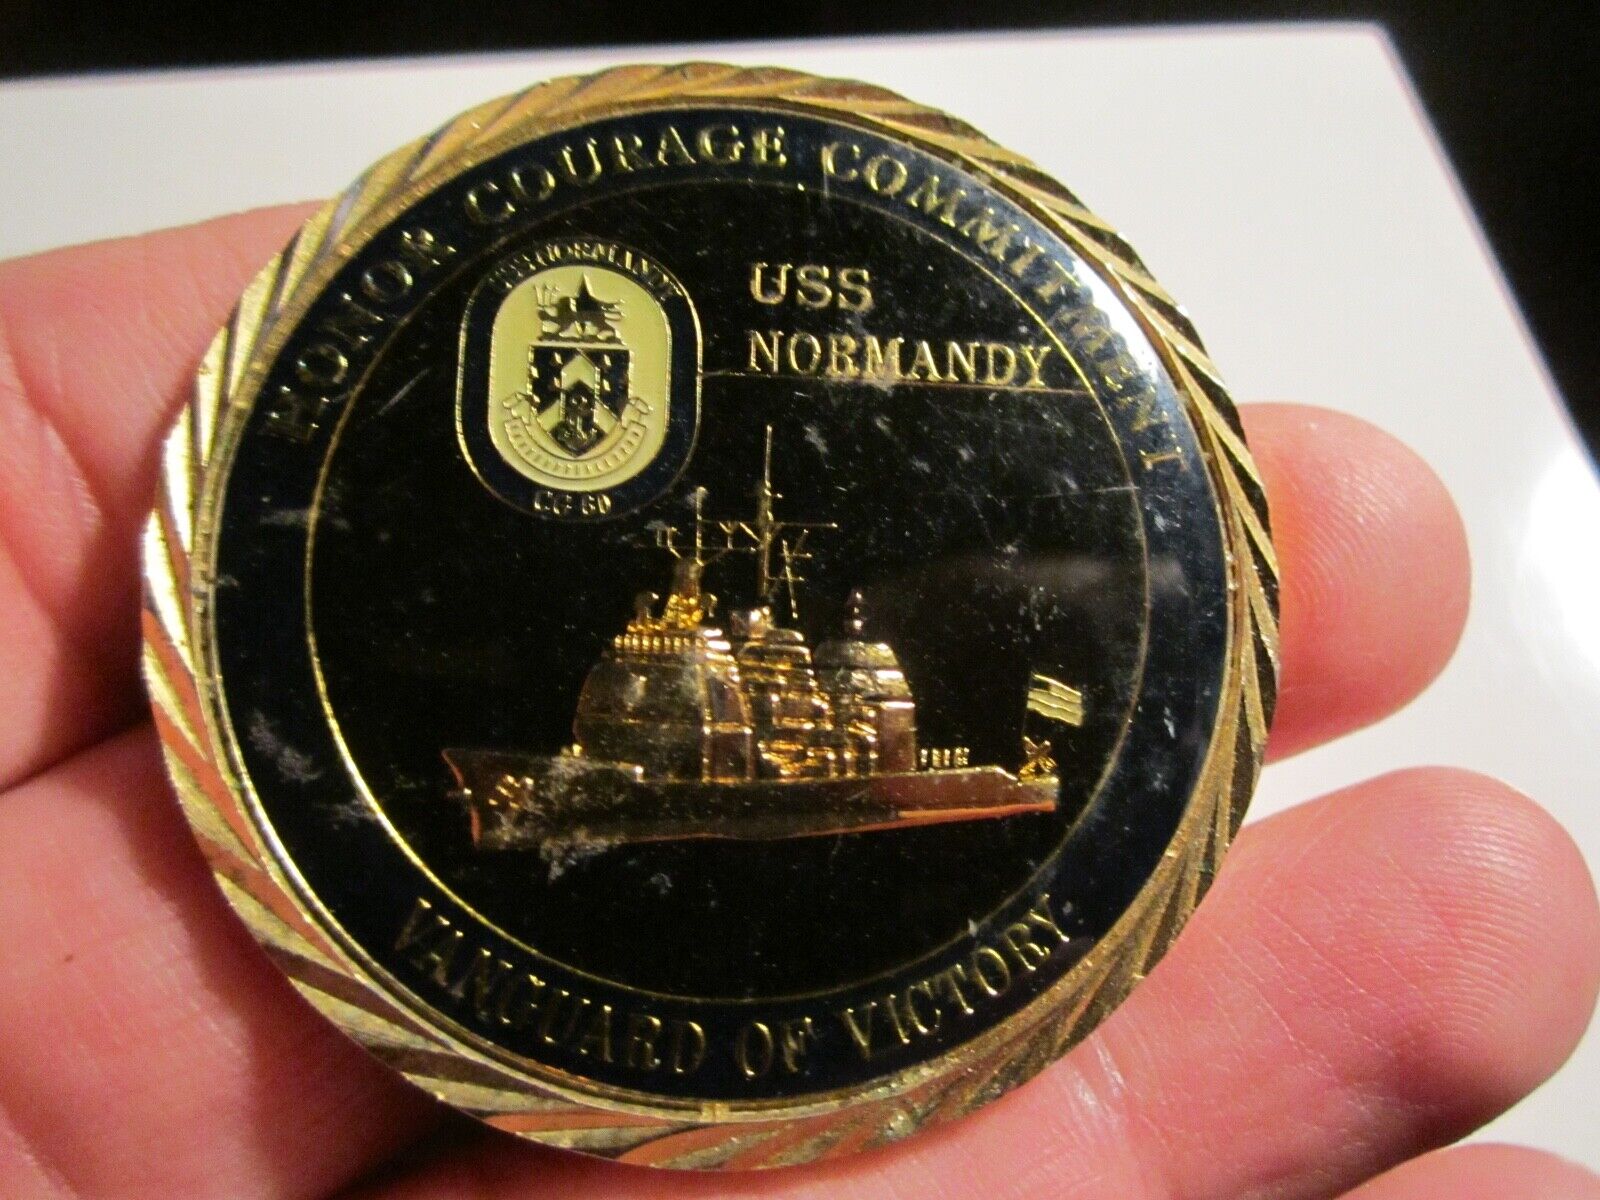 U.S.S. NORMANDY VANGUARD OF VICTORY CHALLENGE COIN COMMAND MASTER CHIEF 2